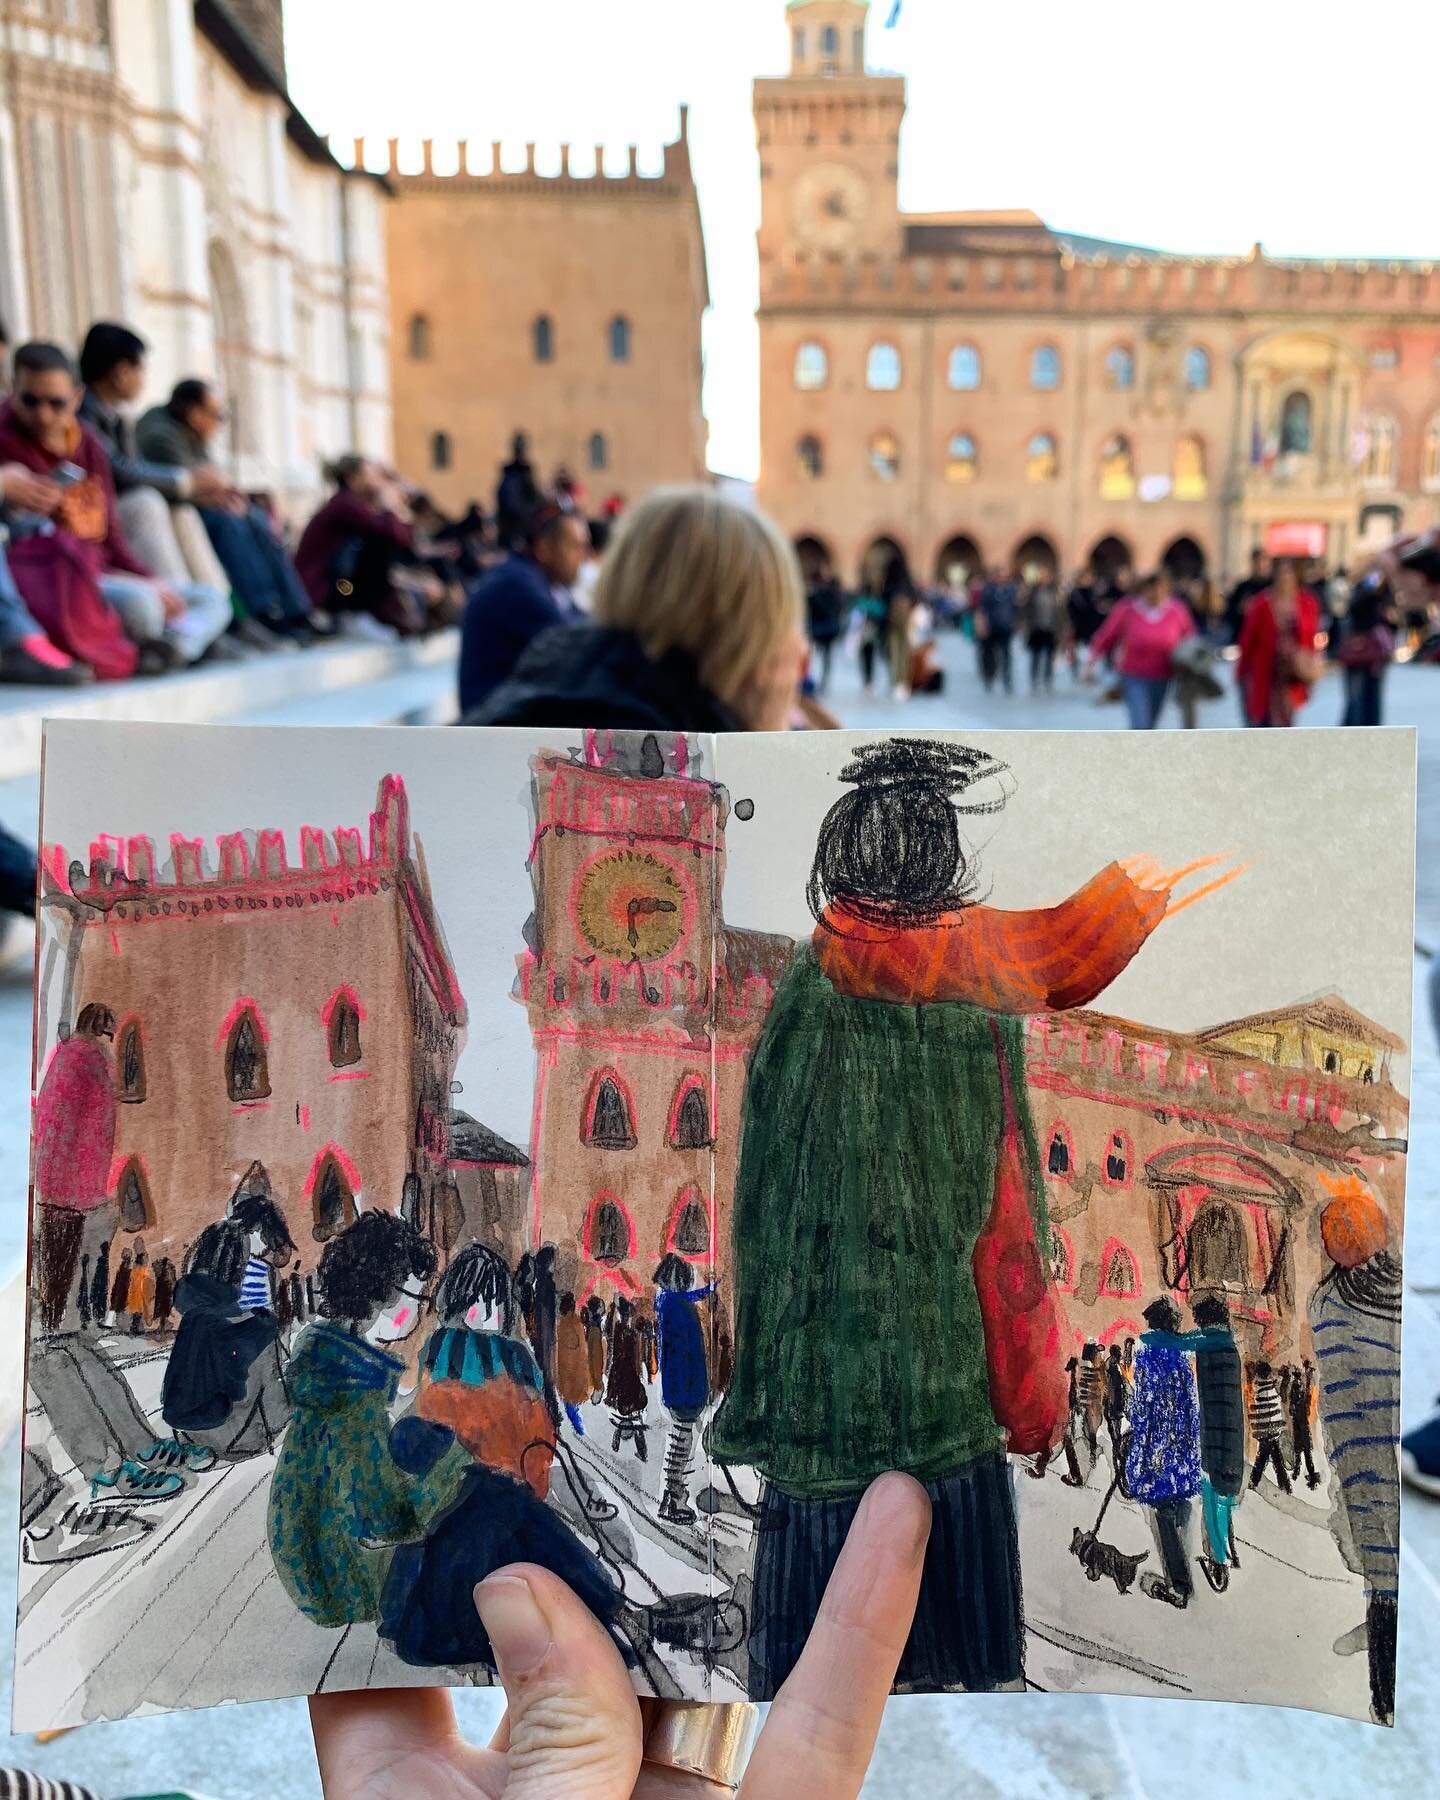 Last day in Bologna! And one final drawing of the square. It&rsquo;s so busy and there&rsquo;s such a buzz that it feels like there is a festival on. But I think it&rsquo;s just everyone celebrating Saturday!
.
What a wonderful, joyful, rollercoaster